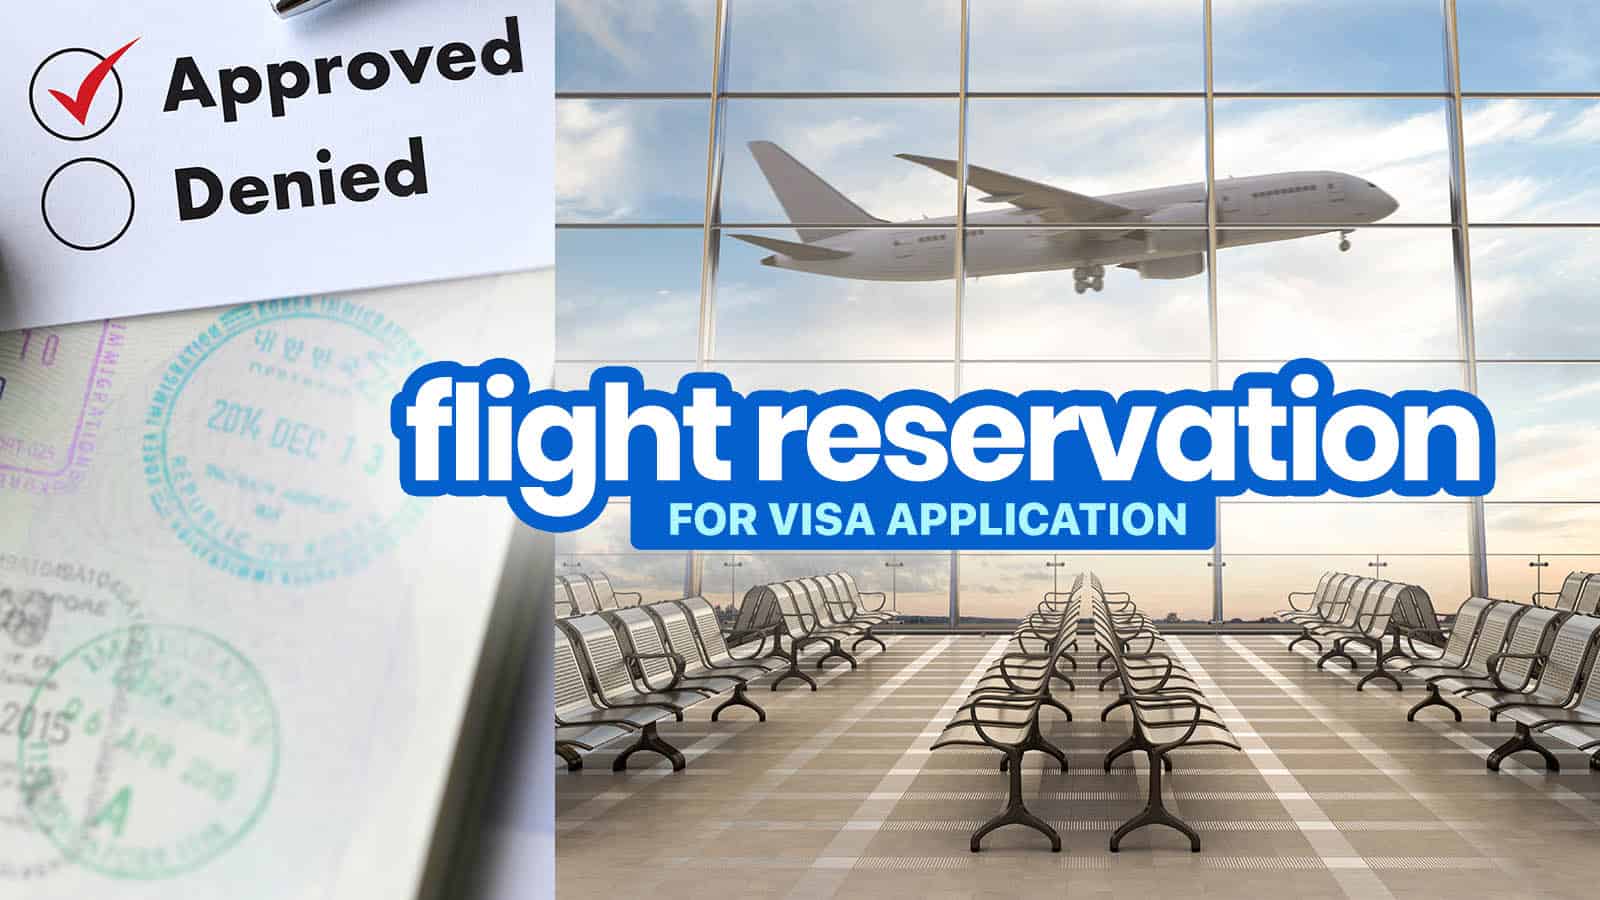 Change flight ticket from IAH to CHS by phone